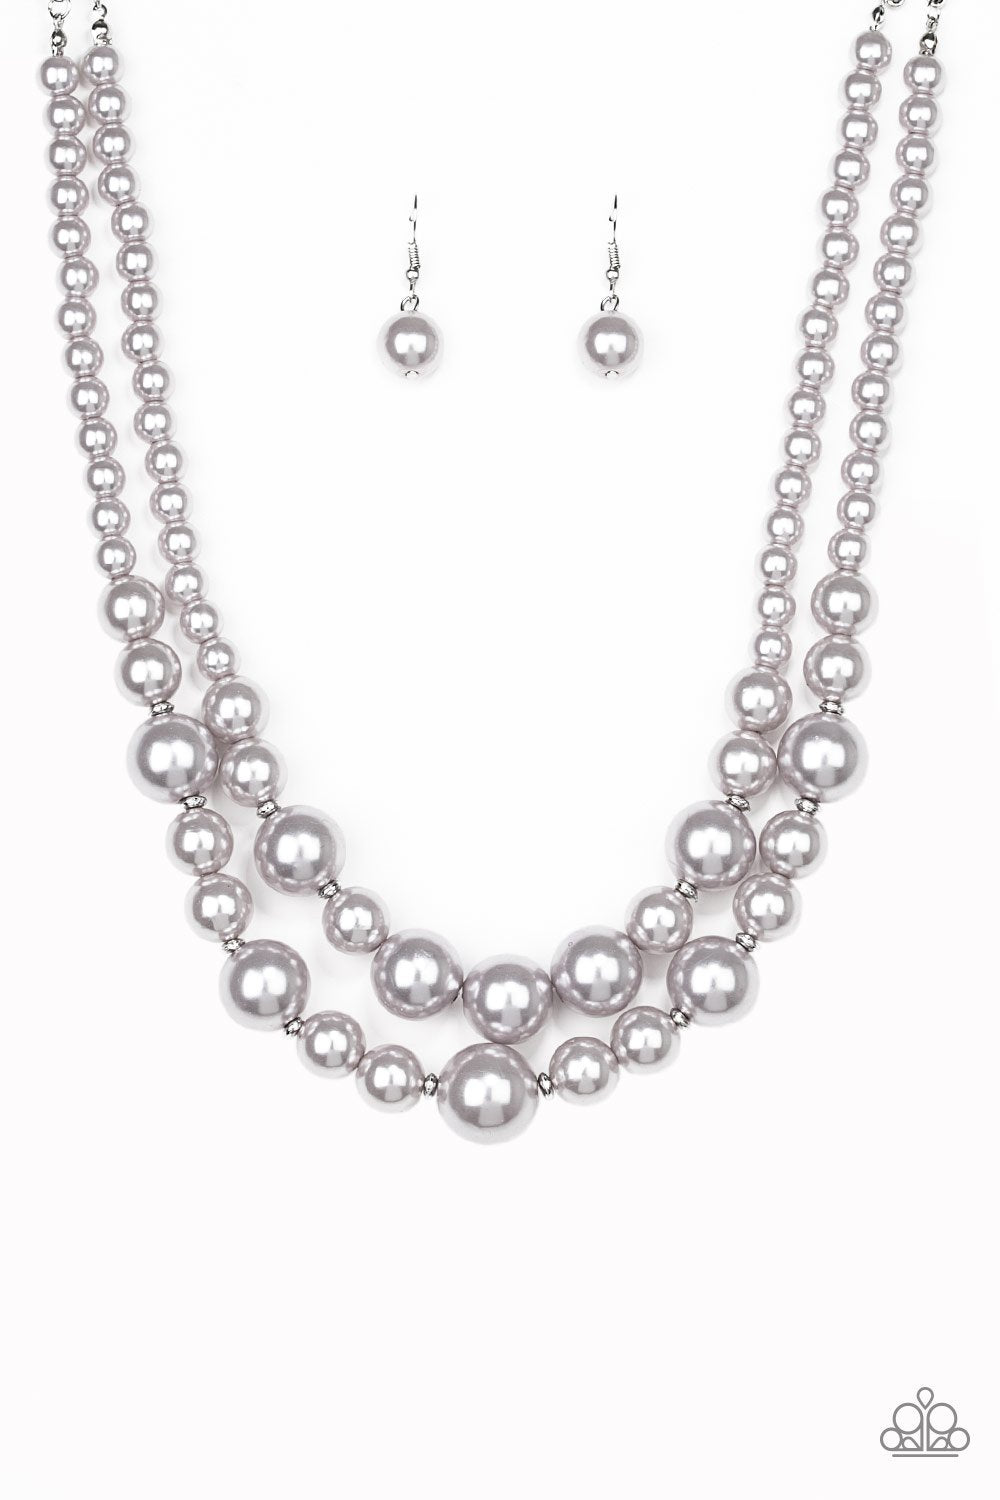 The More The Modest - Paparazzi - Silver Pearl Necklace